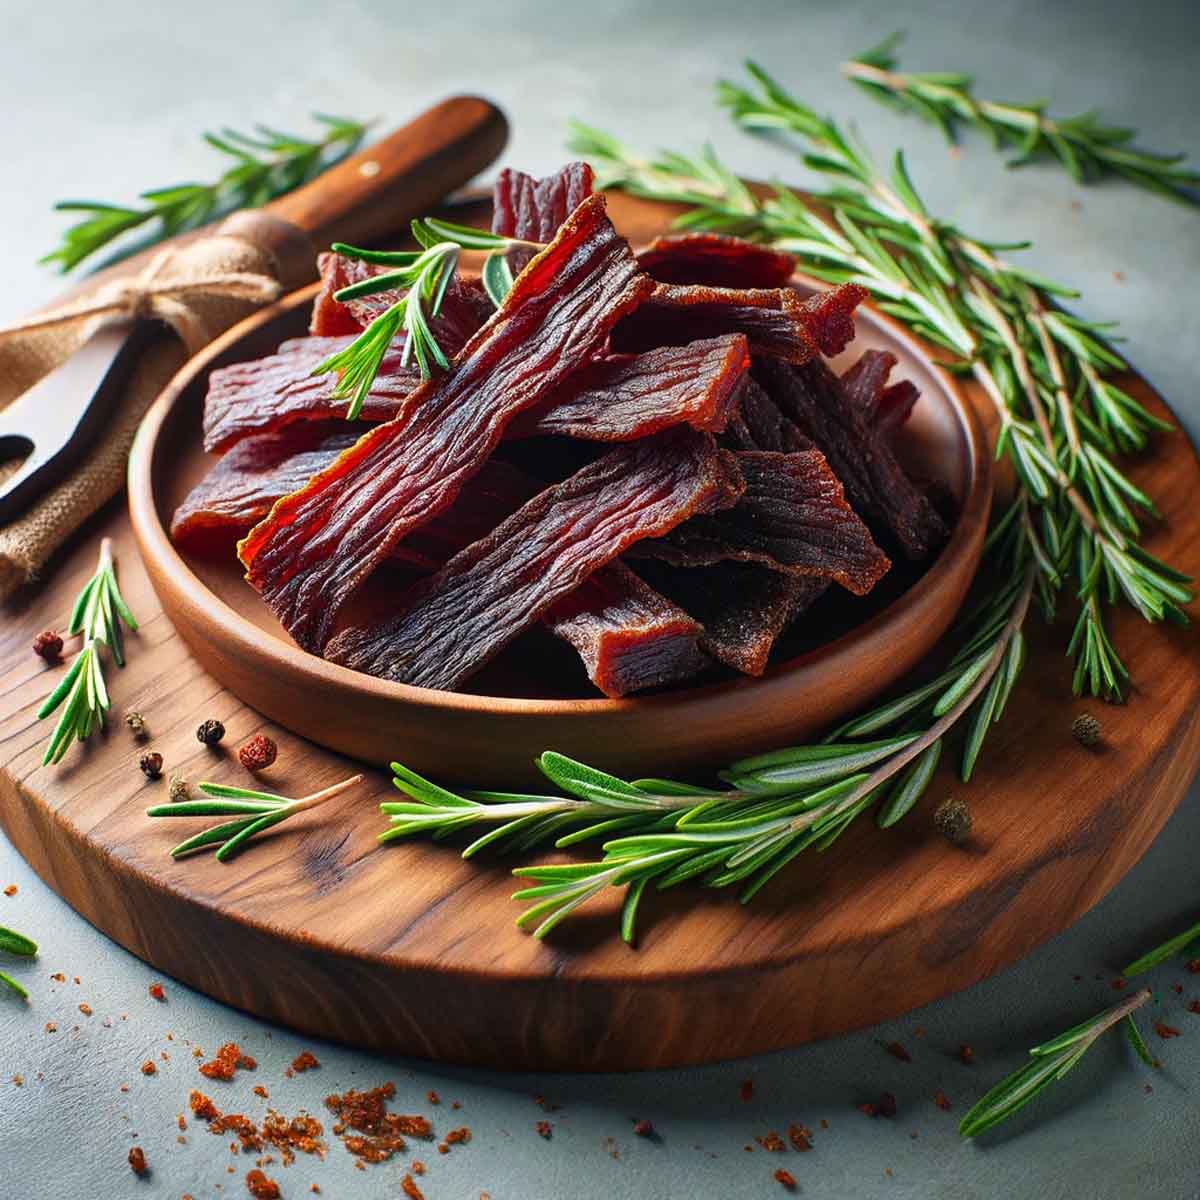 Beef jerky served on a wooden platter, garnished with fresh herbs like rosemary.